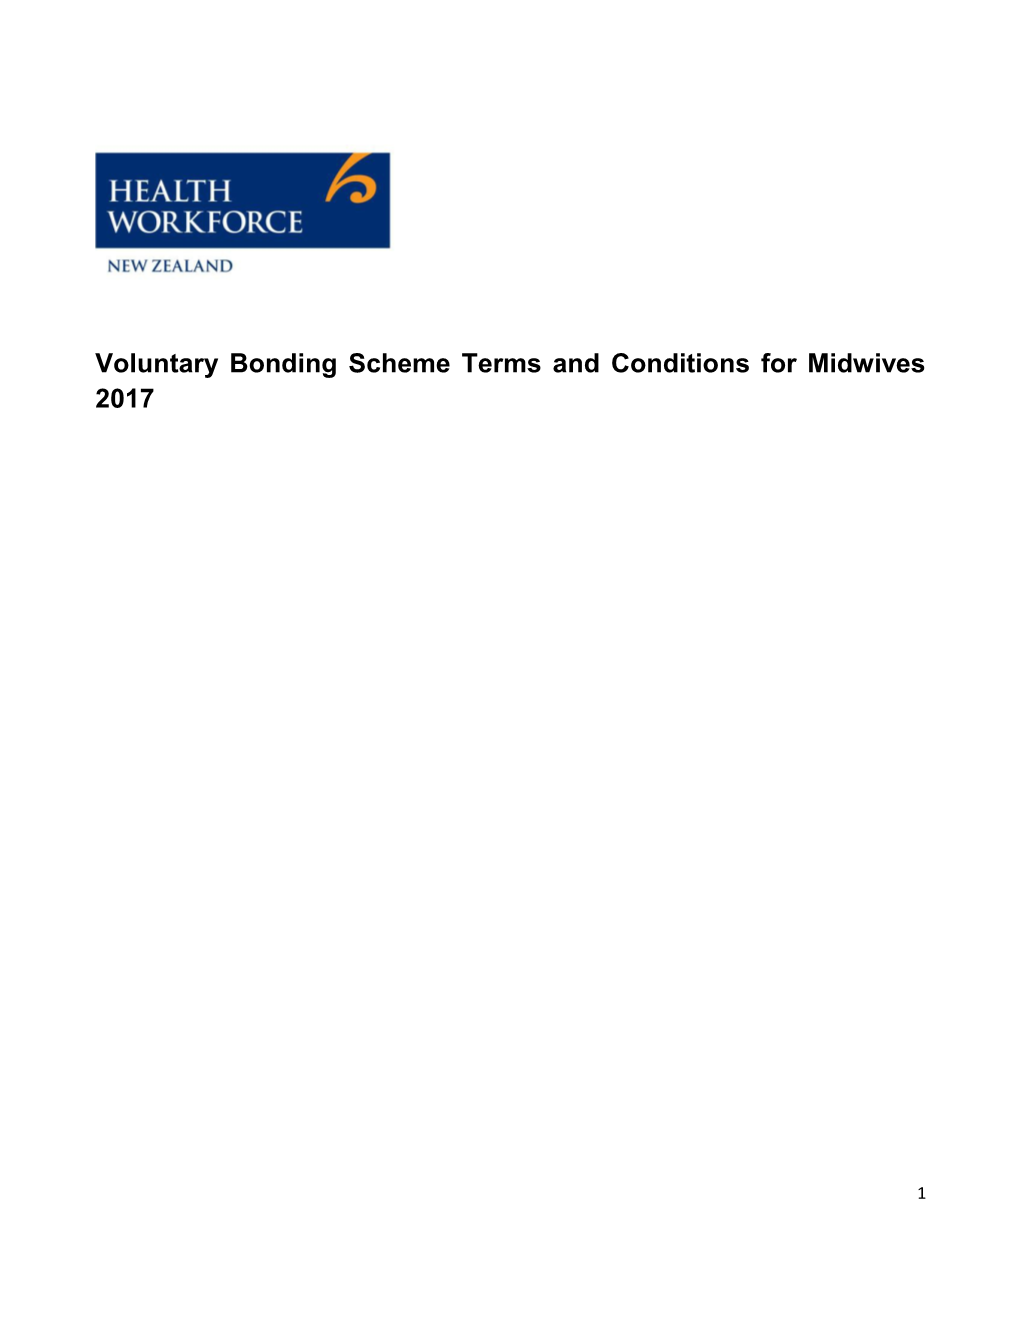 Voluntary Bonding Scheme Terms and Conditions for Midwives 2017